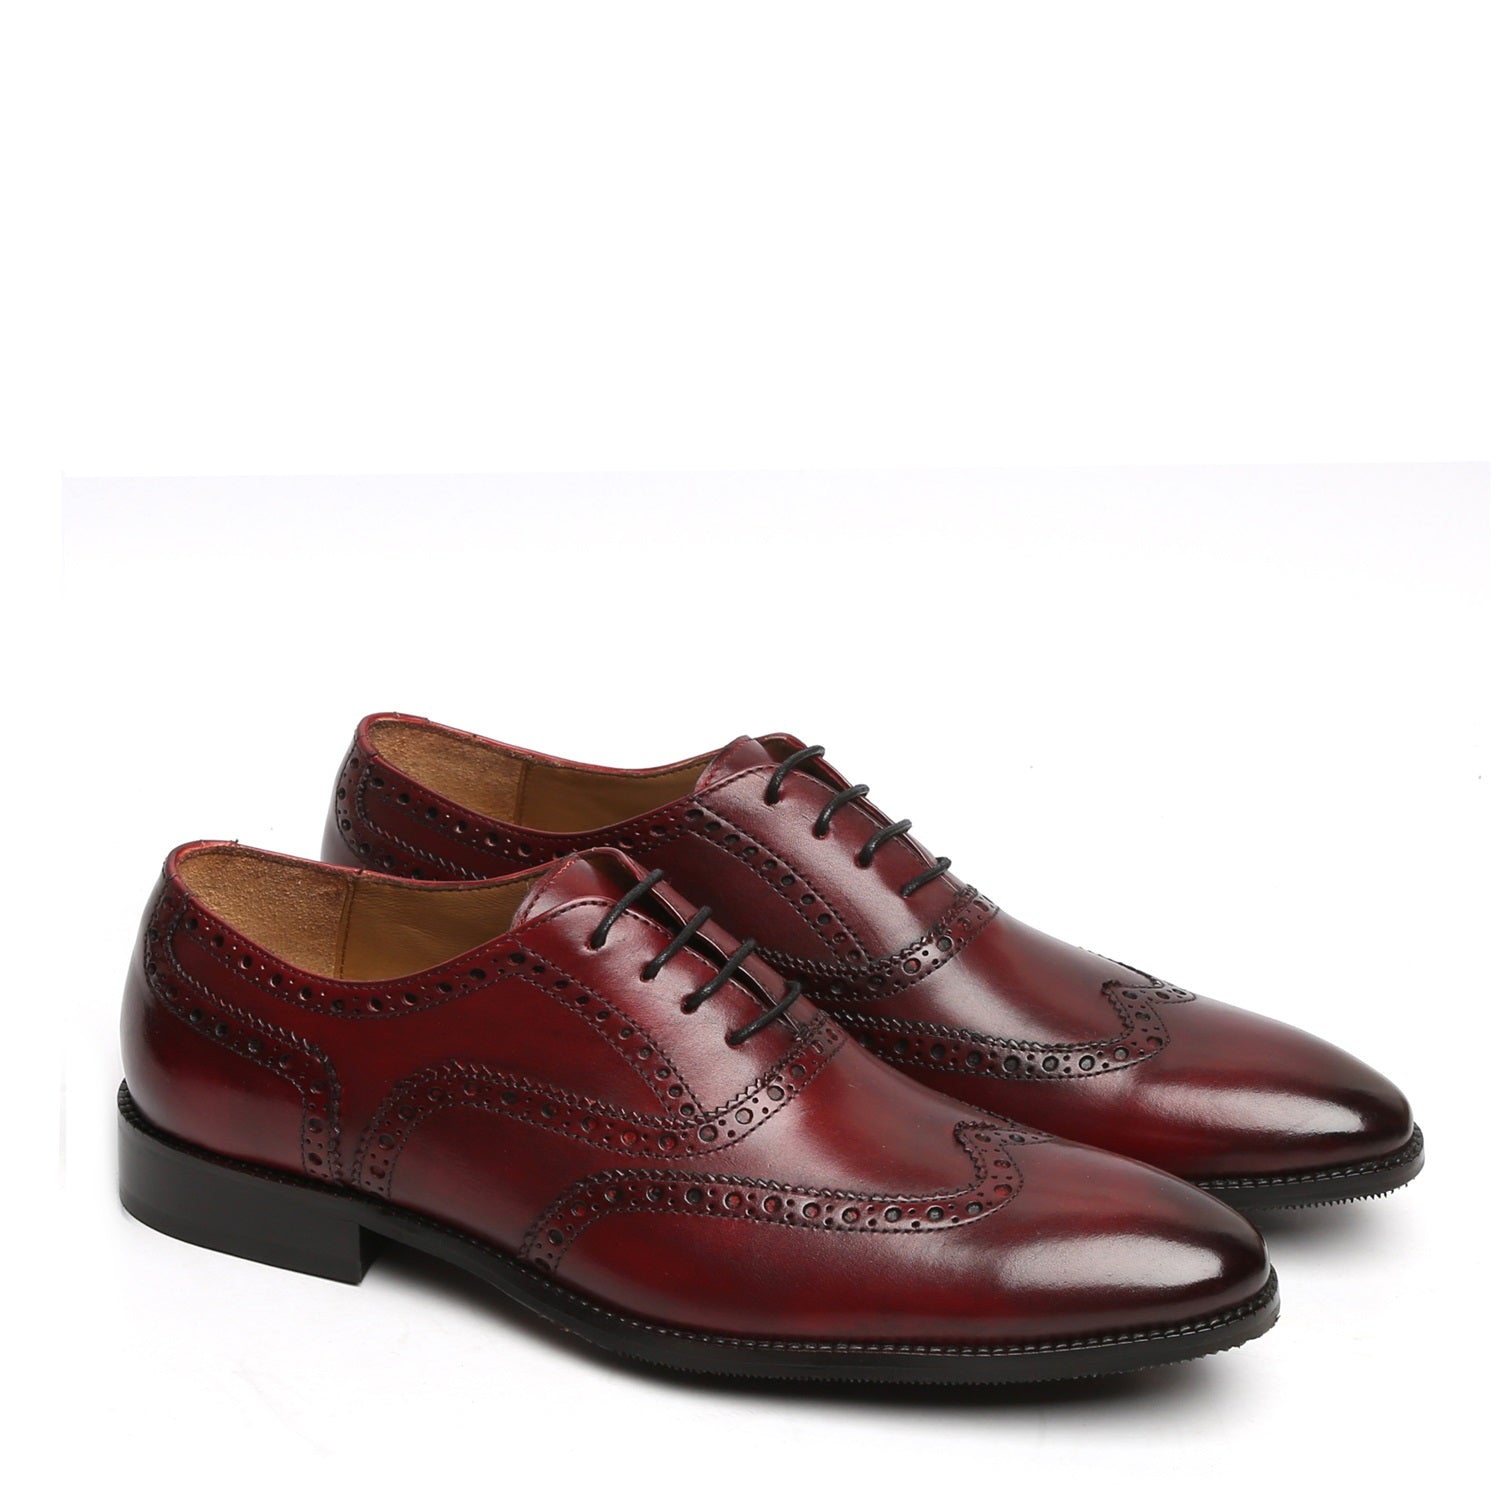 Wine Leather Oxford Shoe With Punching Brogue Design